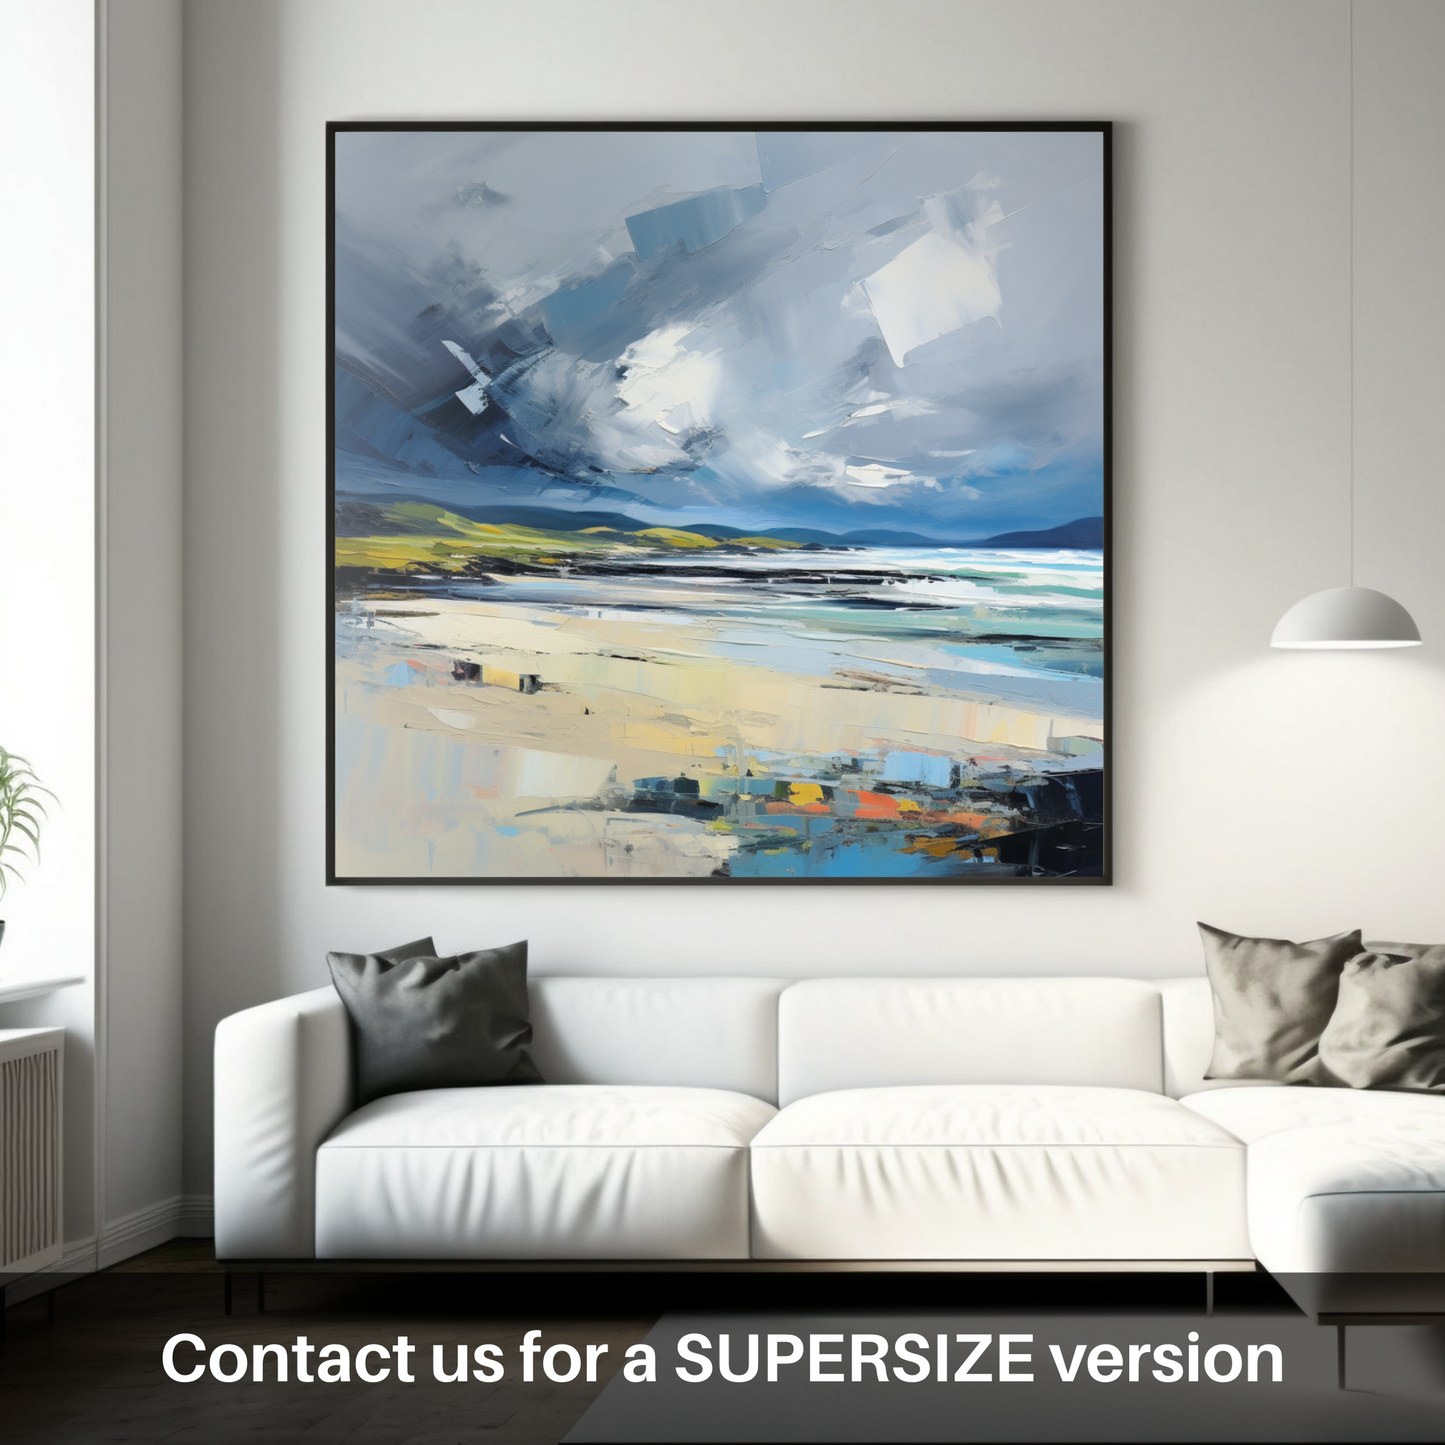 Huge supersize print of Scarista Beach with a stormy sky